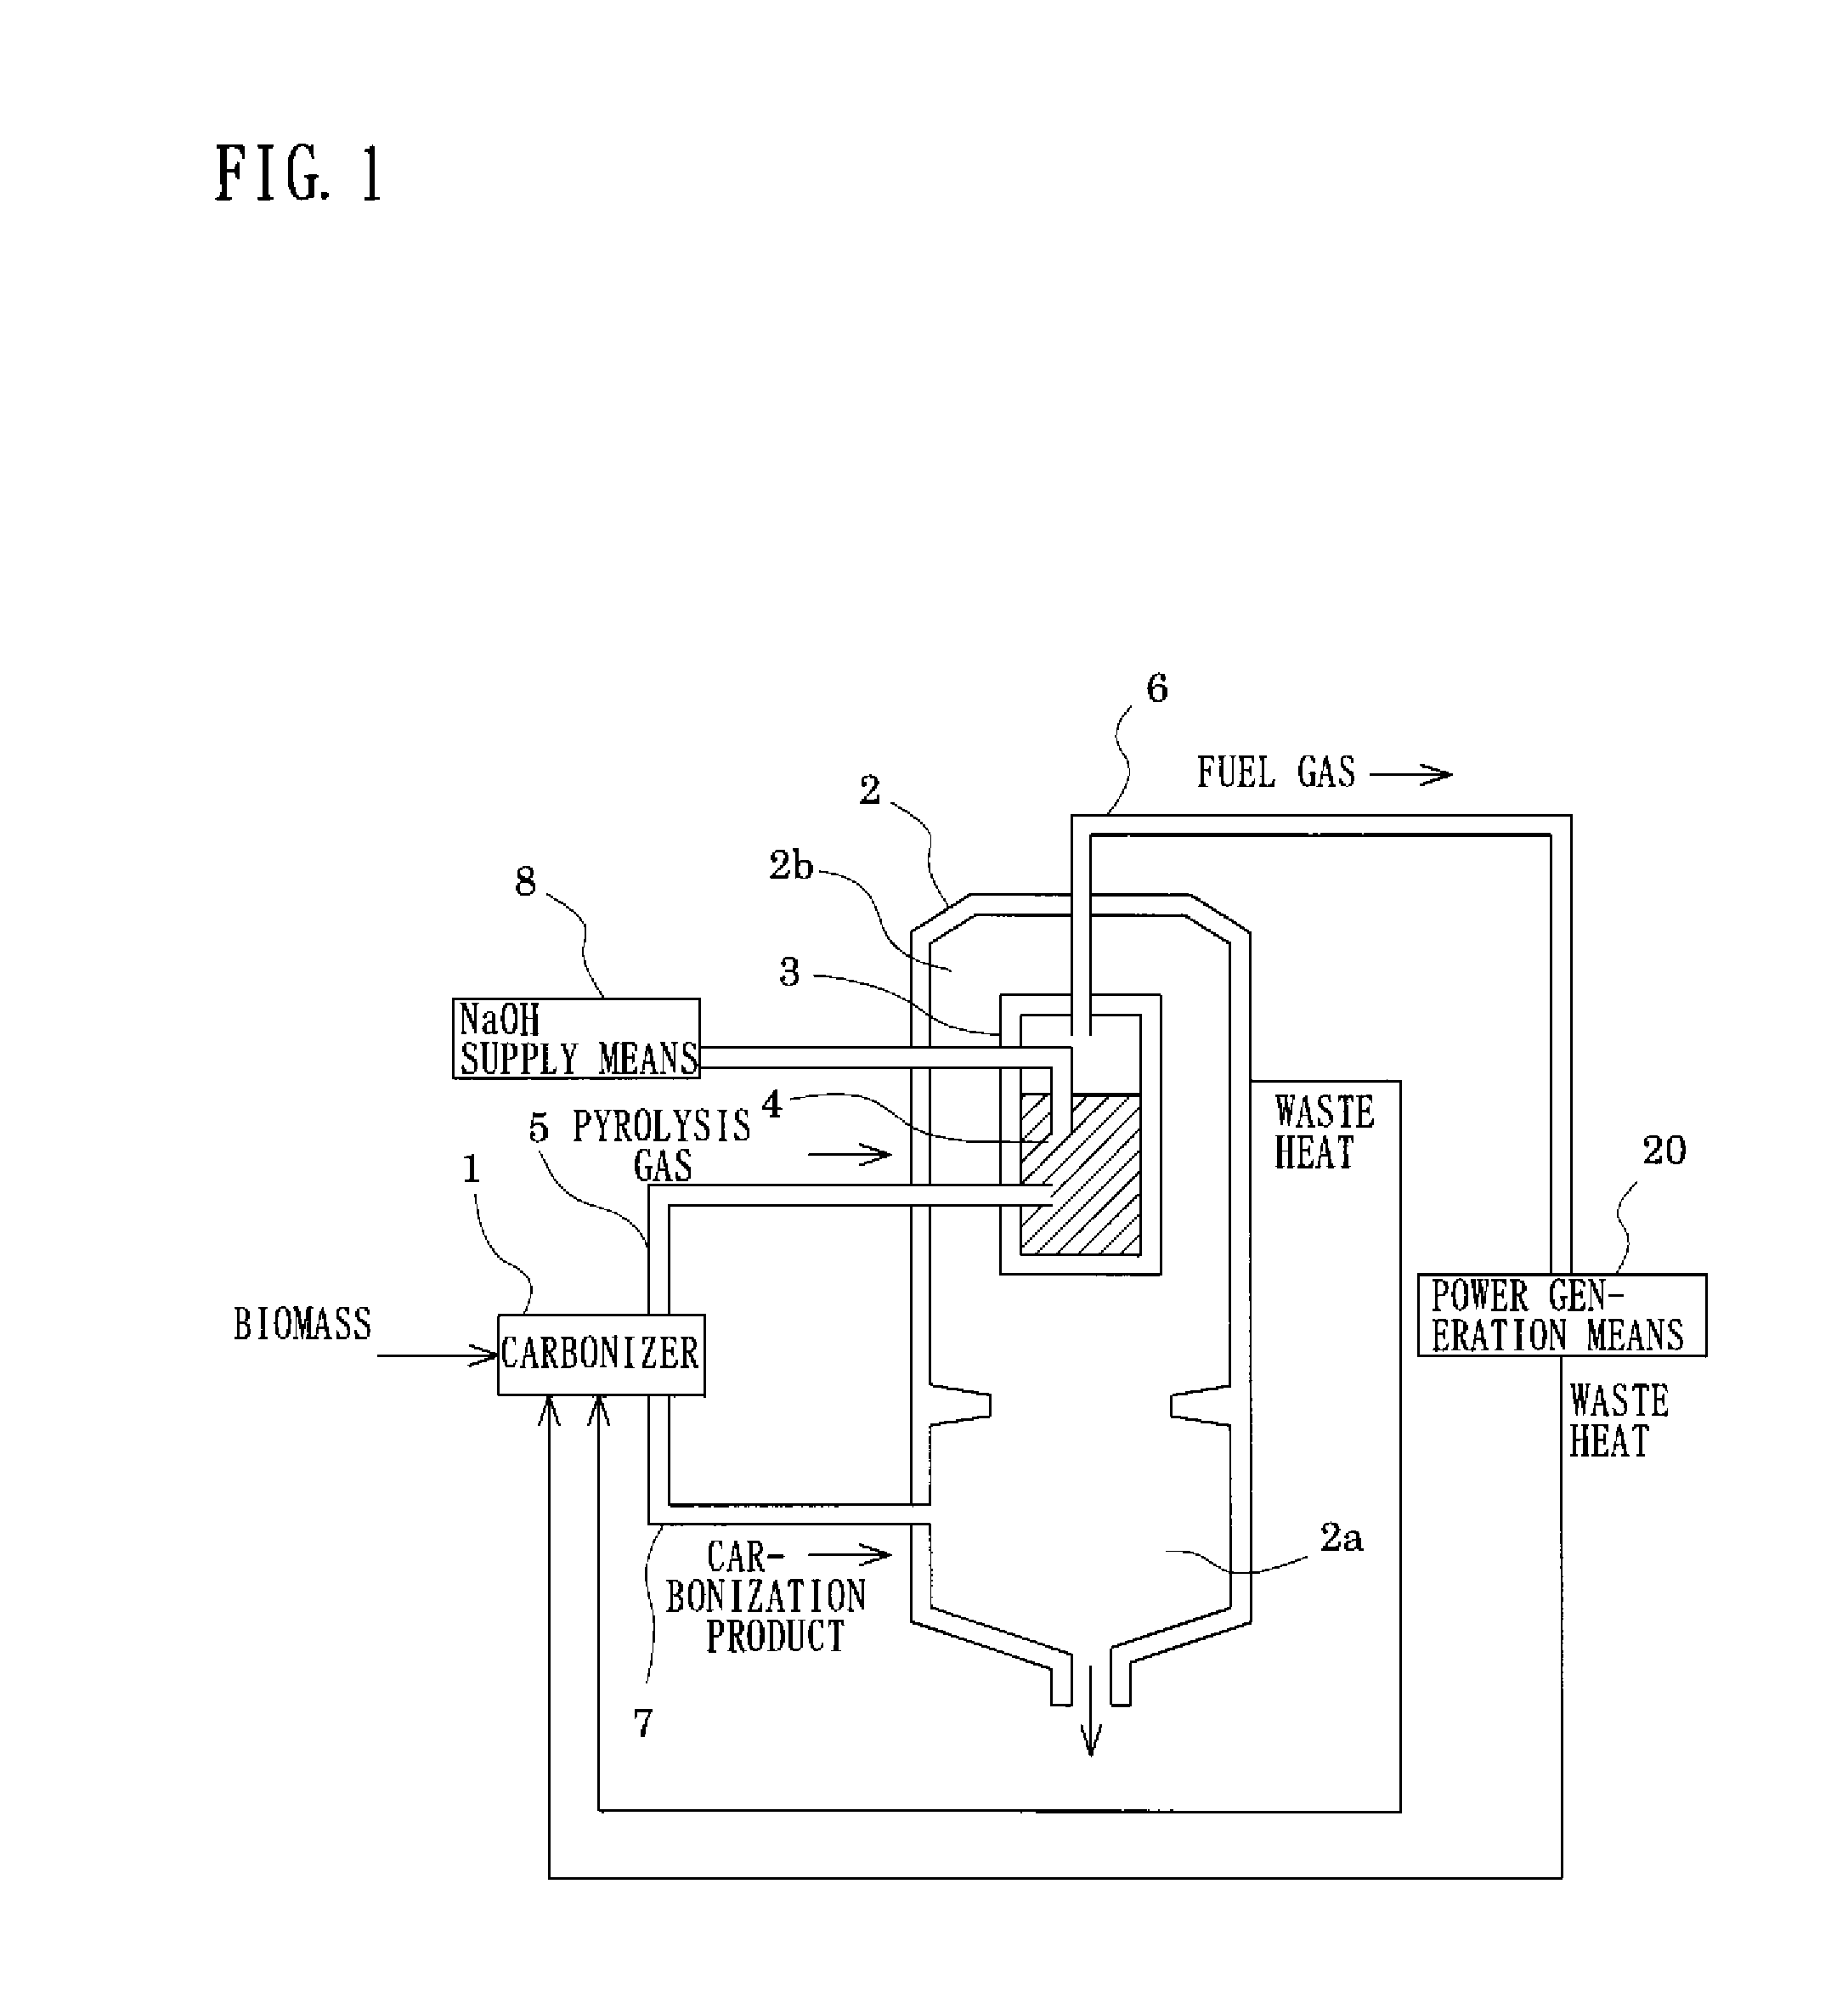 Fuel gas purification apparatus, power generation system, and fuel synthesis system